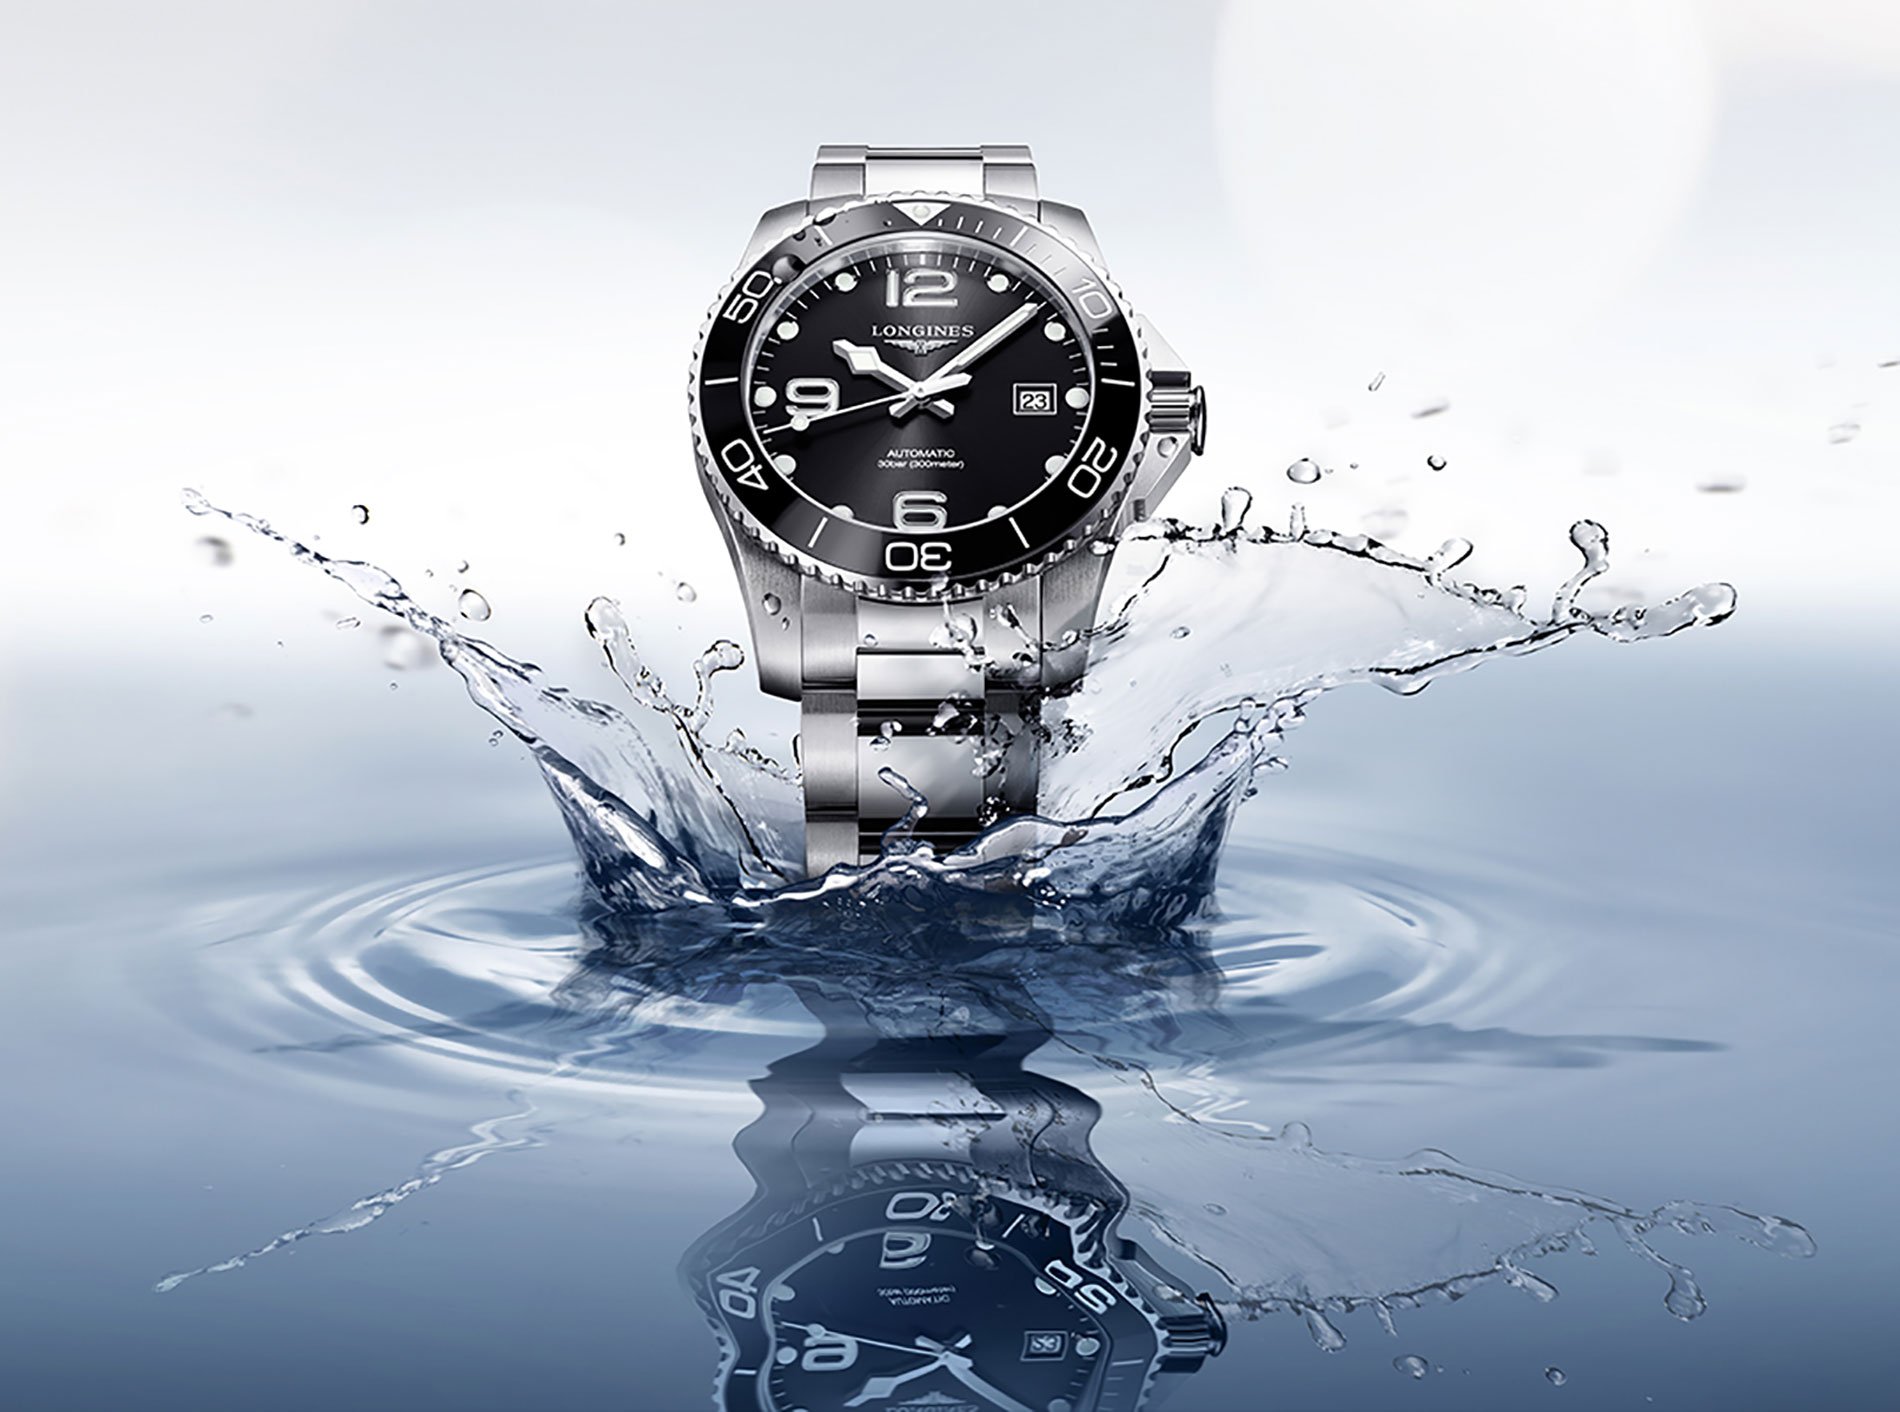 A breath of fresh air for the vanguard timepieces of the Longines HydroConquest collection